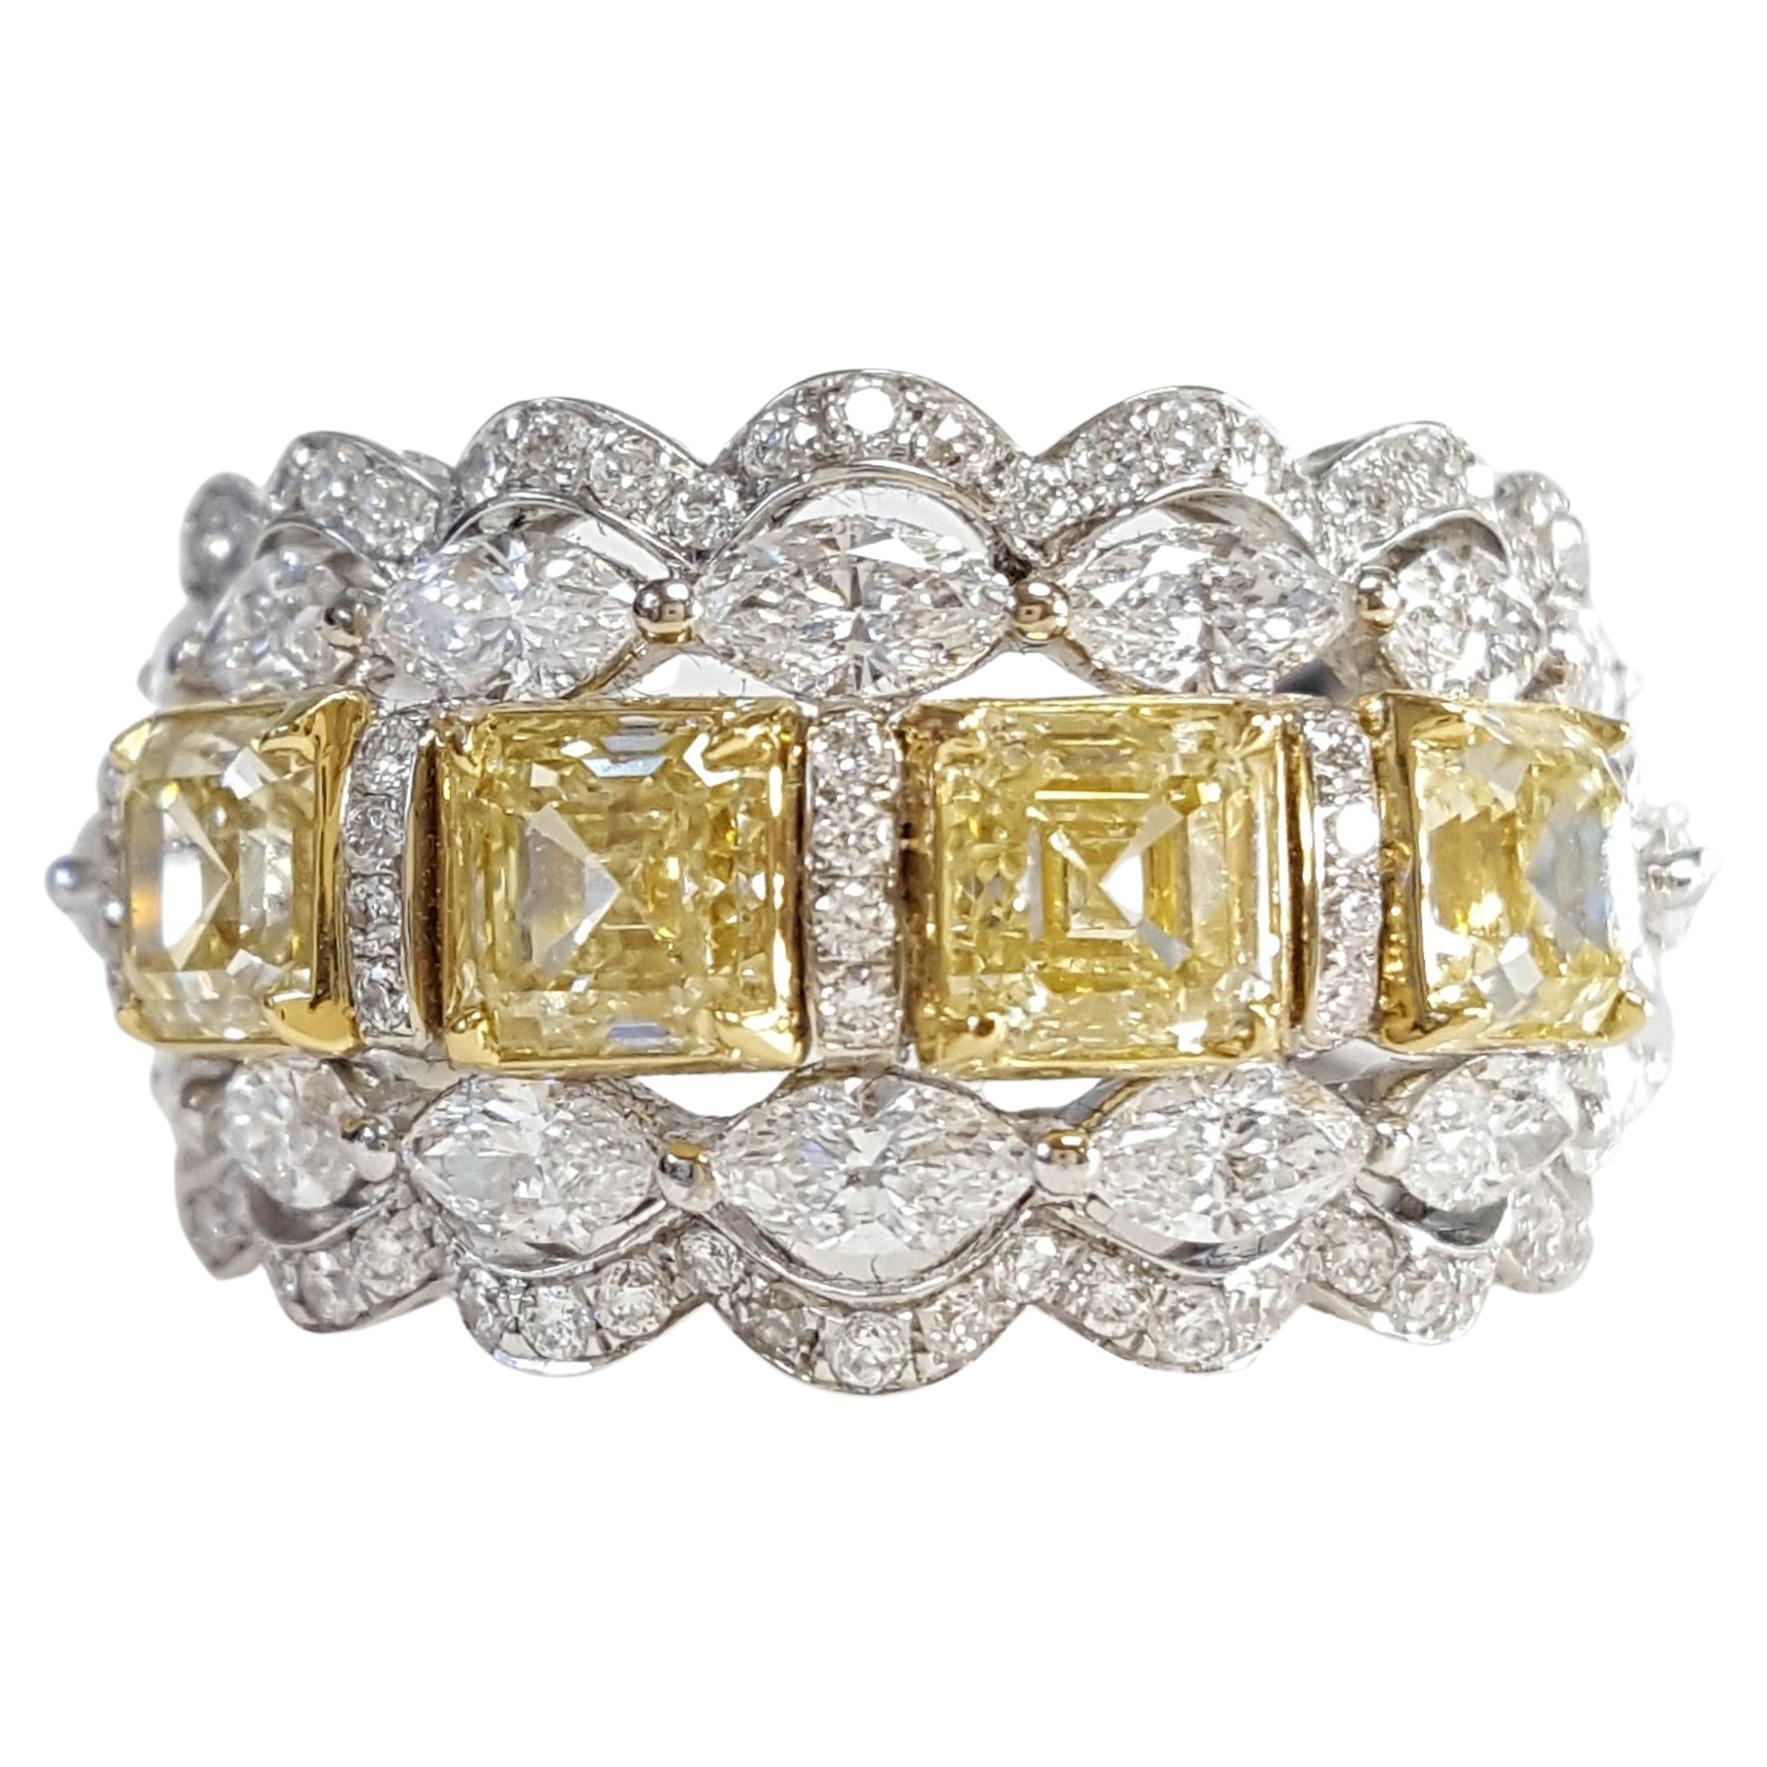 Contemporary 4.72 Asscher Cut Yellow & White Diamond Eternity Band Set in 18K White Gold. For Sale